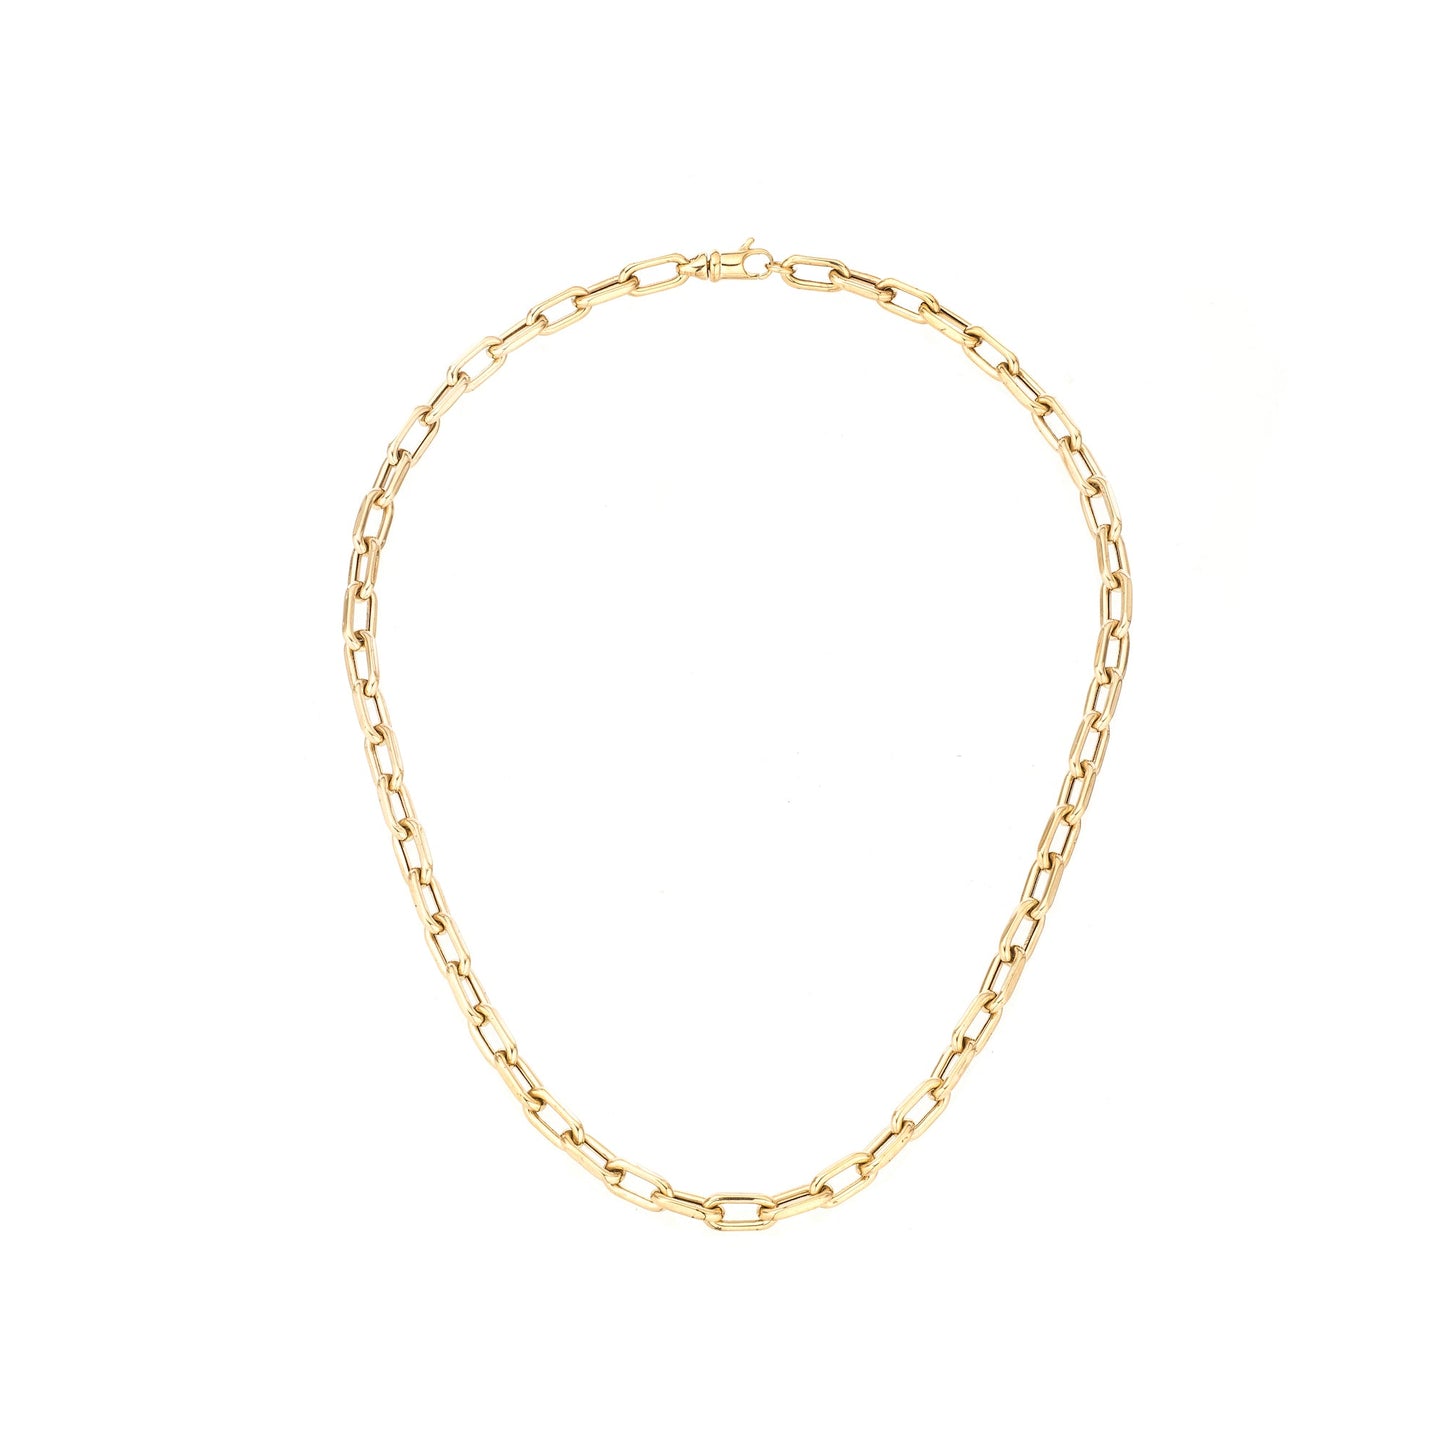 Frida 5.3mm 18" Italian Chain Link Necklace